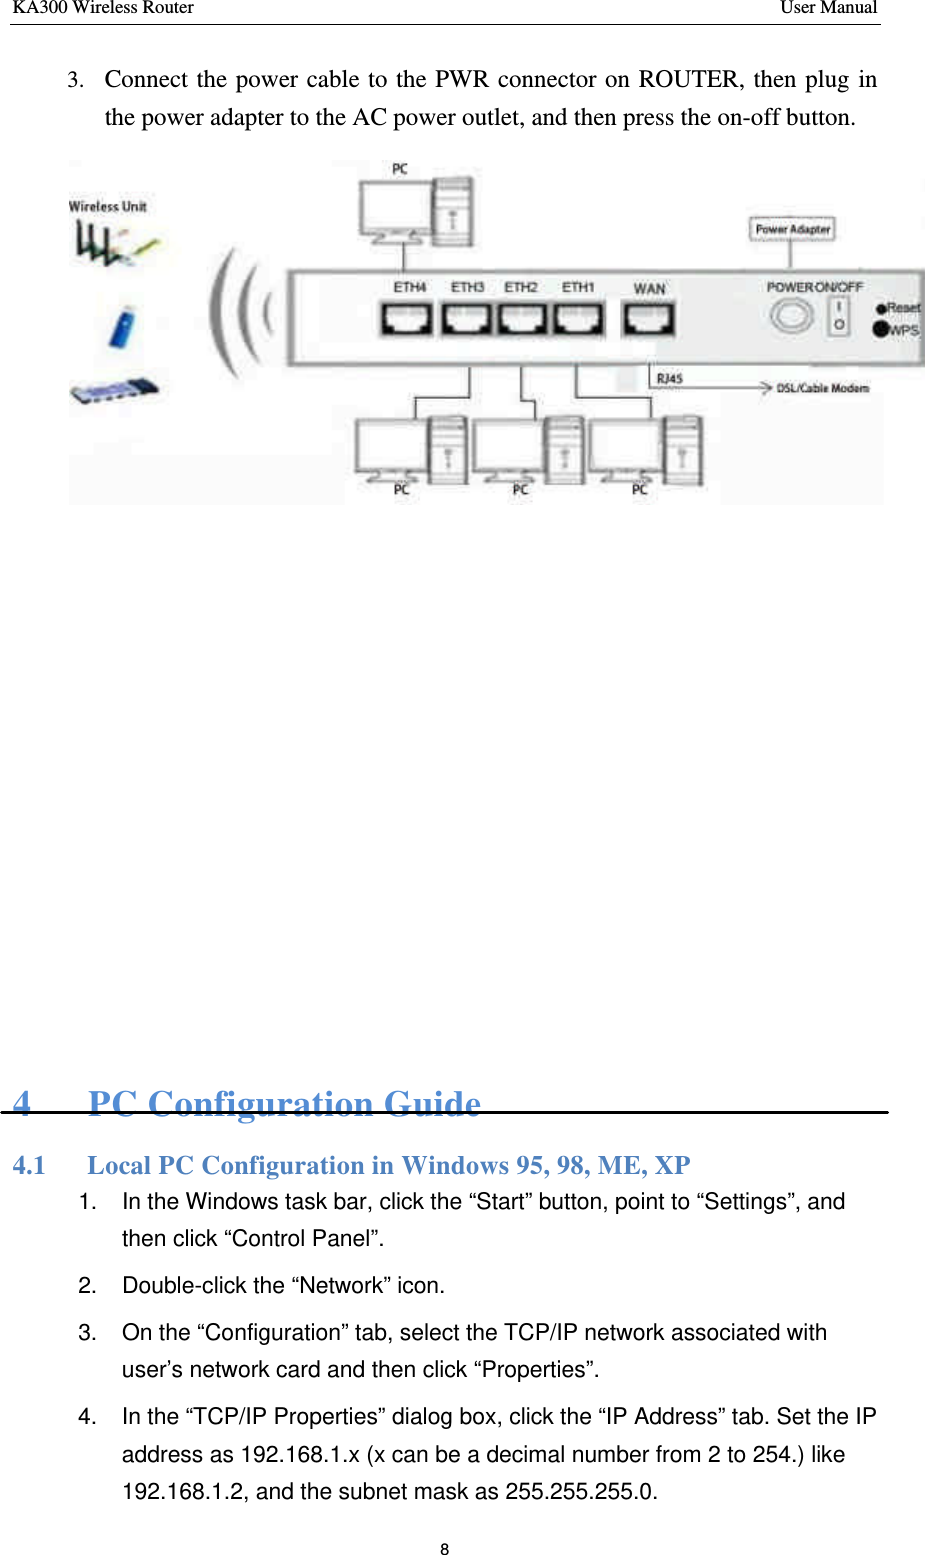 KA300 Wireless Router       User Manual 8  3. Connect the power cable to the PWR connector on ROUTER, then plug in the power adapter to the AC power outlet, and then press the on-off button.           4   PC Configuration Guide 4.1   Local PC Configuration in Windows 95, 98, ME, XP 1. In the Windows task bar, click the “Start” button, point to “Settings”, and then click “Control Panel”.  2. Double-click the “Network” icon. 3. On the “C onfiguration” tab, select the TCP/IP network associated with user’s network card and then click “Properties”.  4. In the “TCP/IP Properties” dialog box, click the “IP Address” tab. Set the IP address as 192.168.1.x (x can be a decimal number from 2 to 254.) like 192.168.1.2, and the subnet mask as 255.255.255.0. 